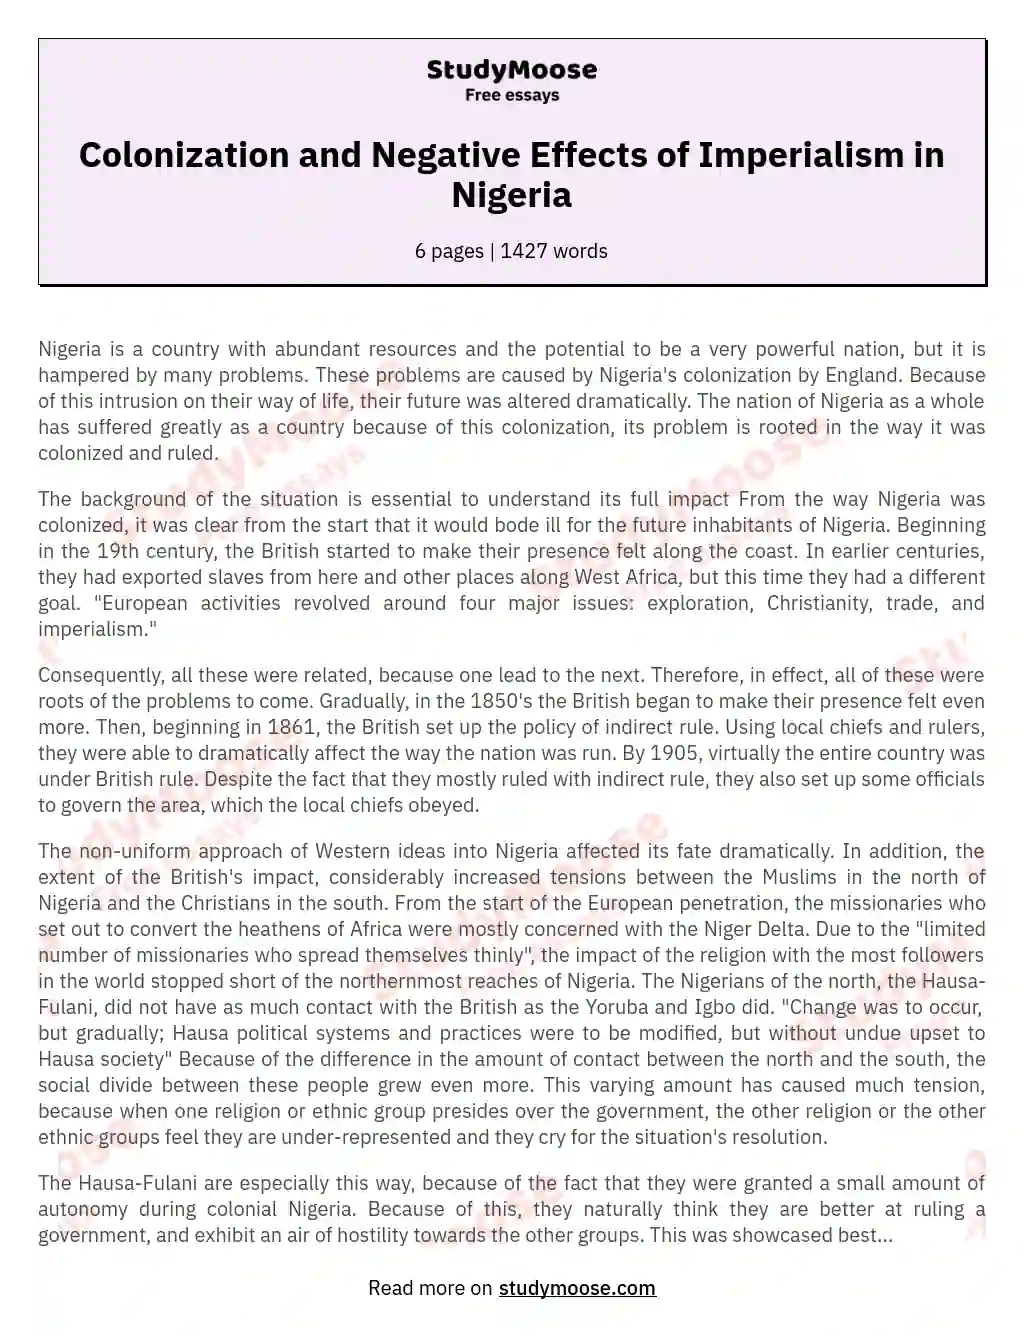 Colonization and Negative Effects of Imperialism in Nigeria essay